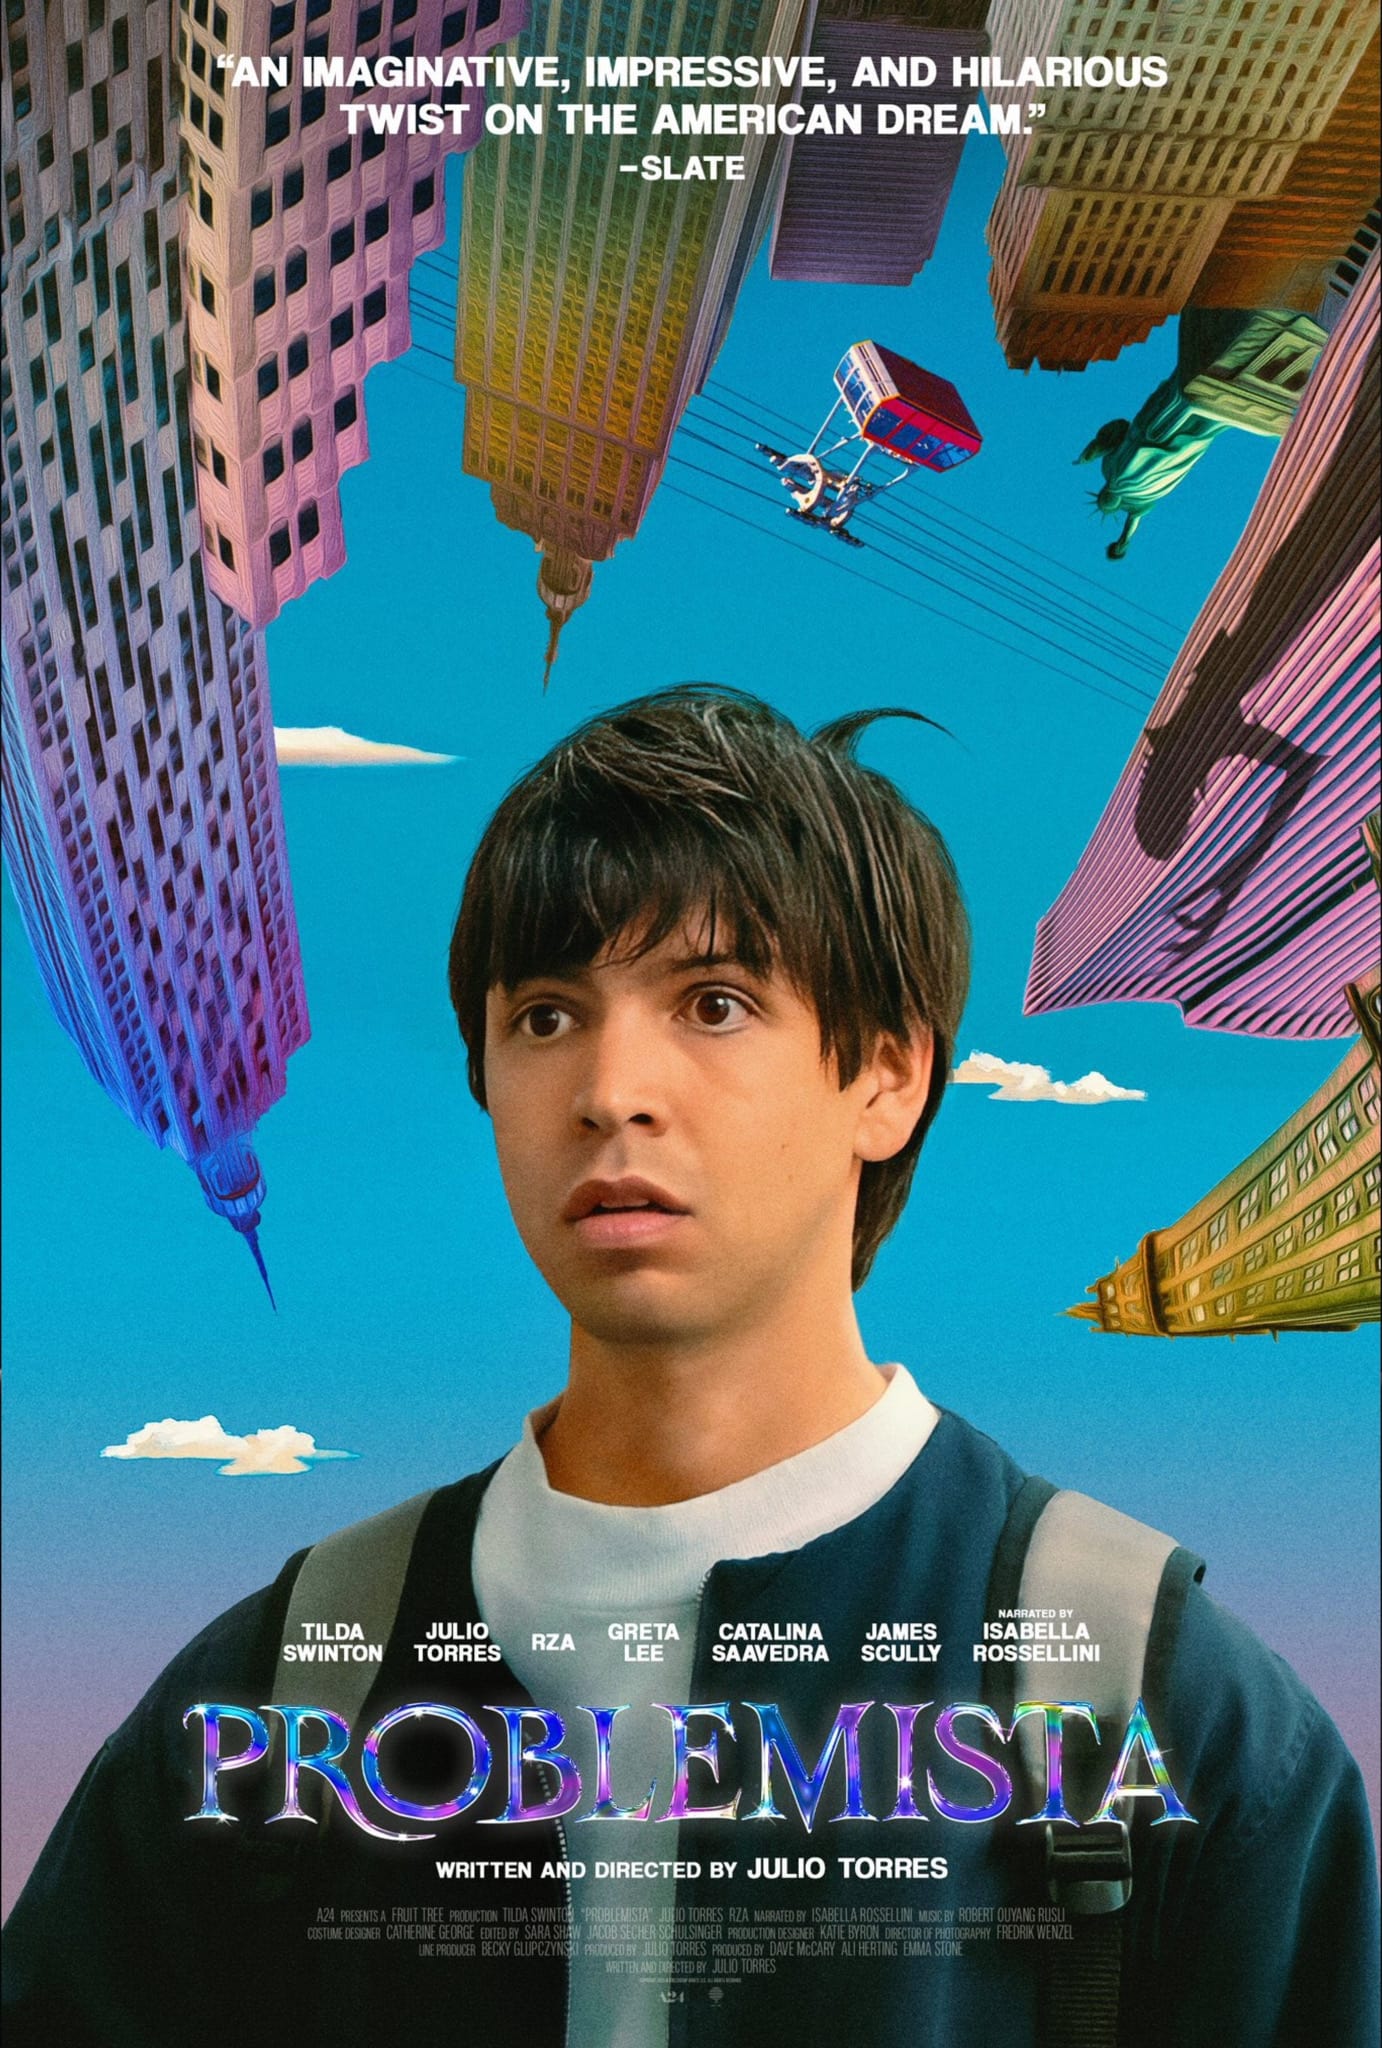 Poster for the movie "Problemista"